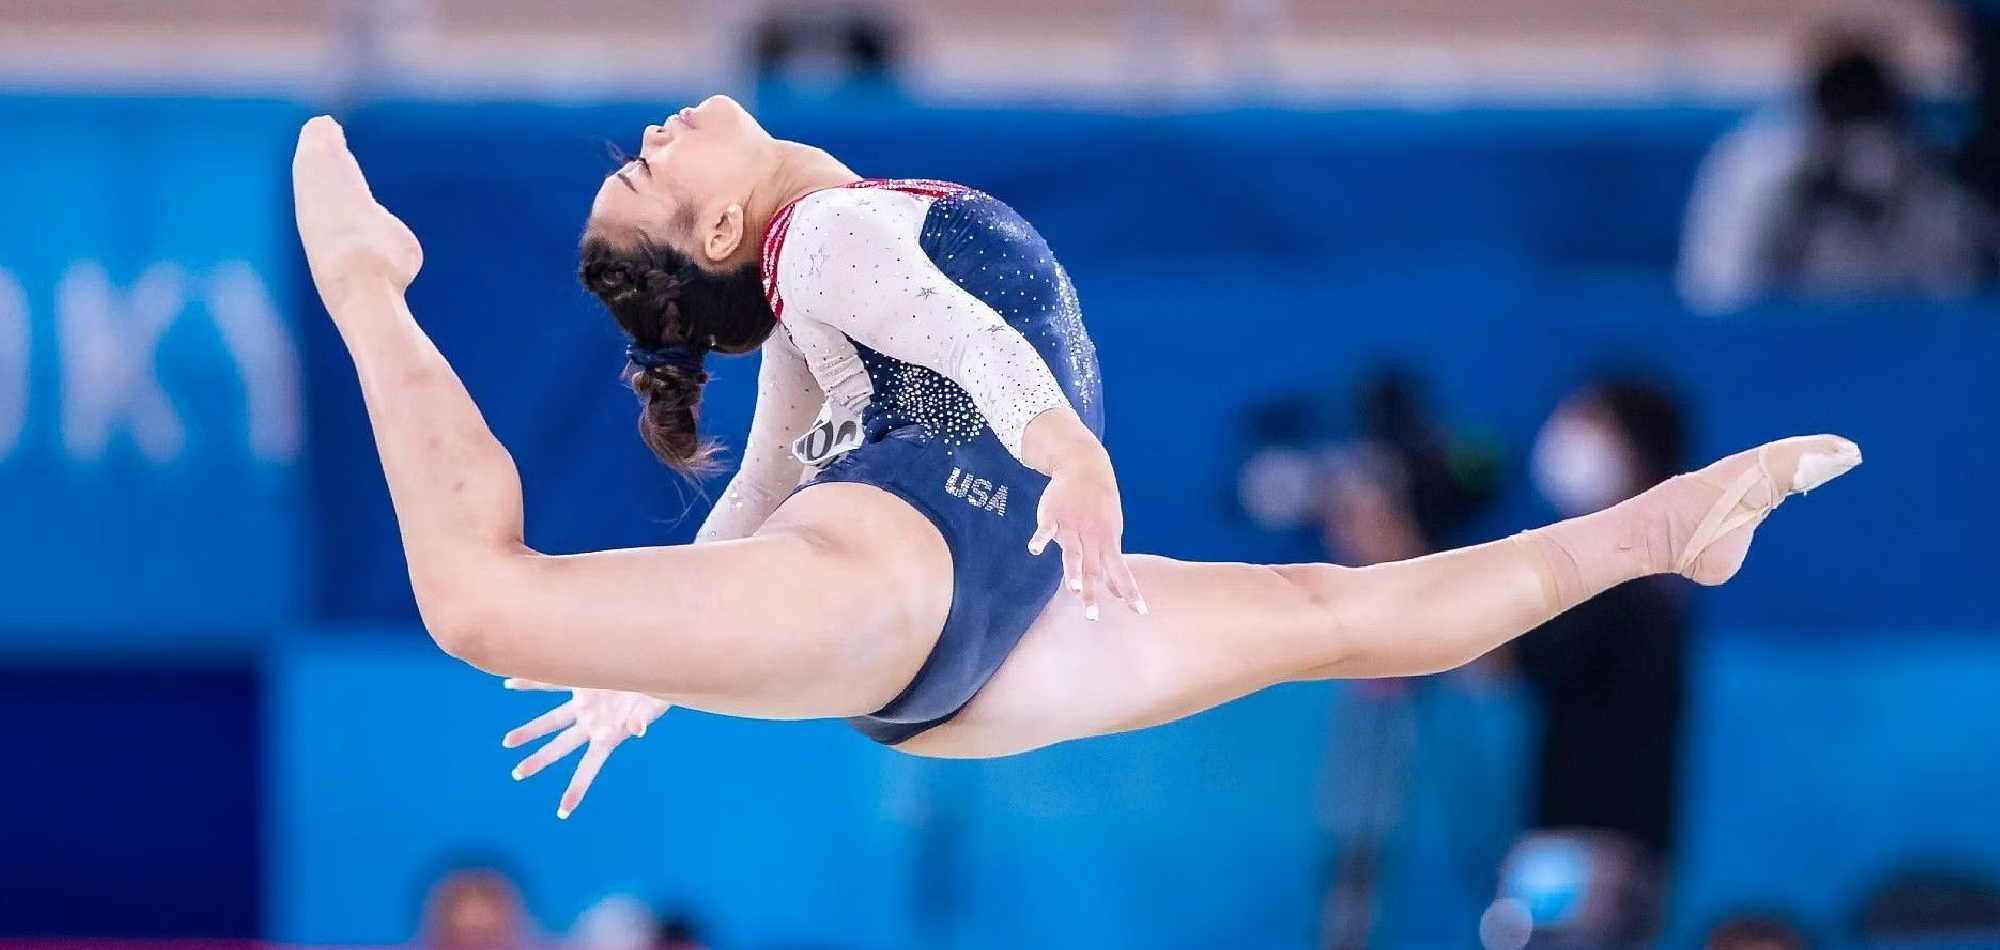 Stage set for Artistic Gymnastics World Cup